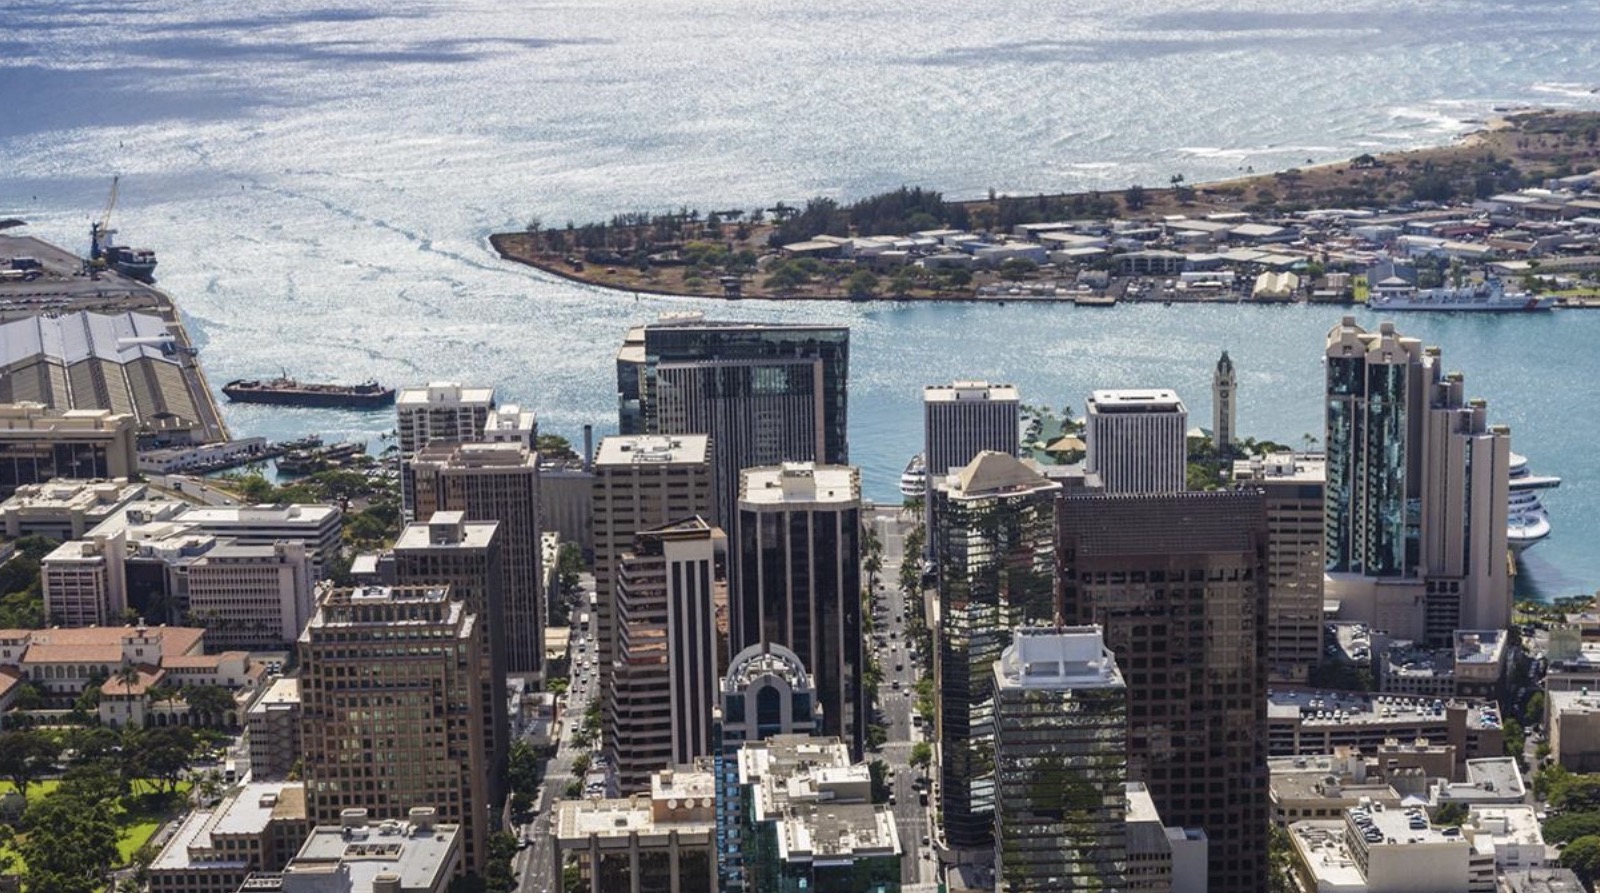 Honolulu harbor with downtown building in foreground